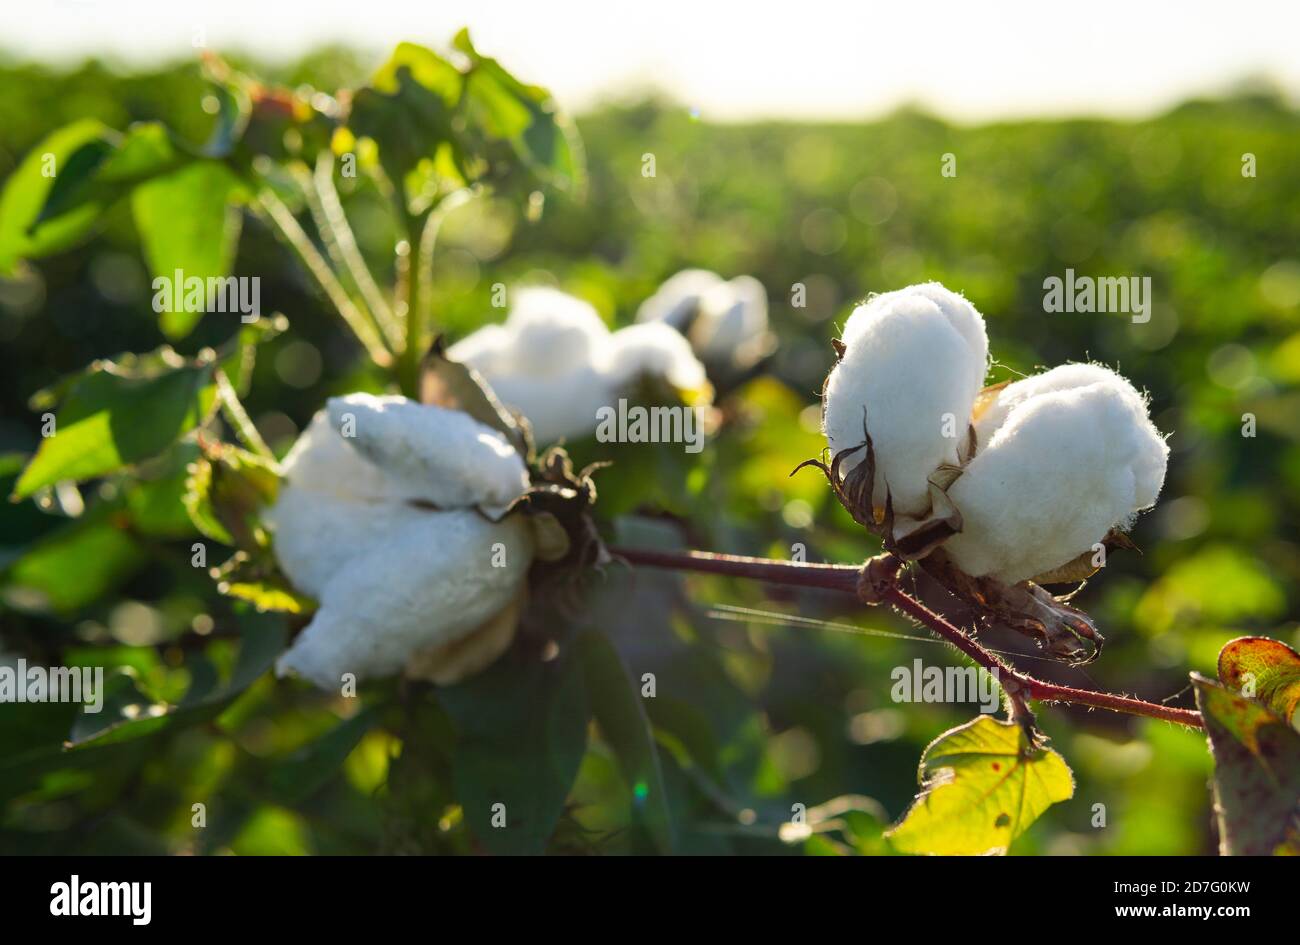 White Soft Cotton Industry Growing Naturally In Field Stock Photo